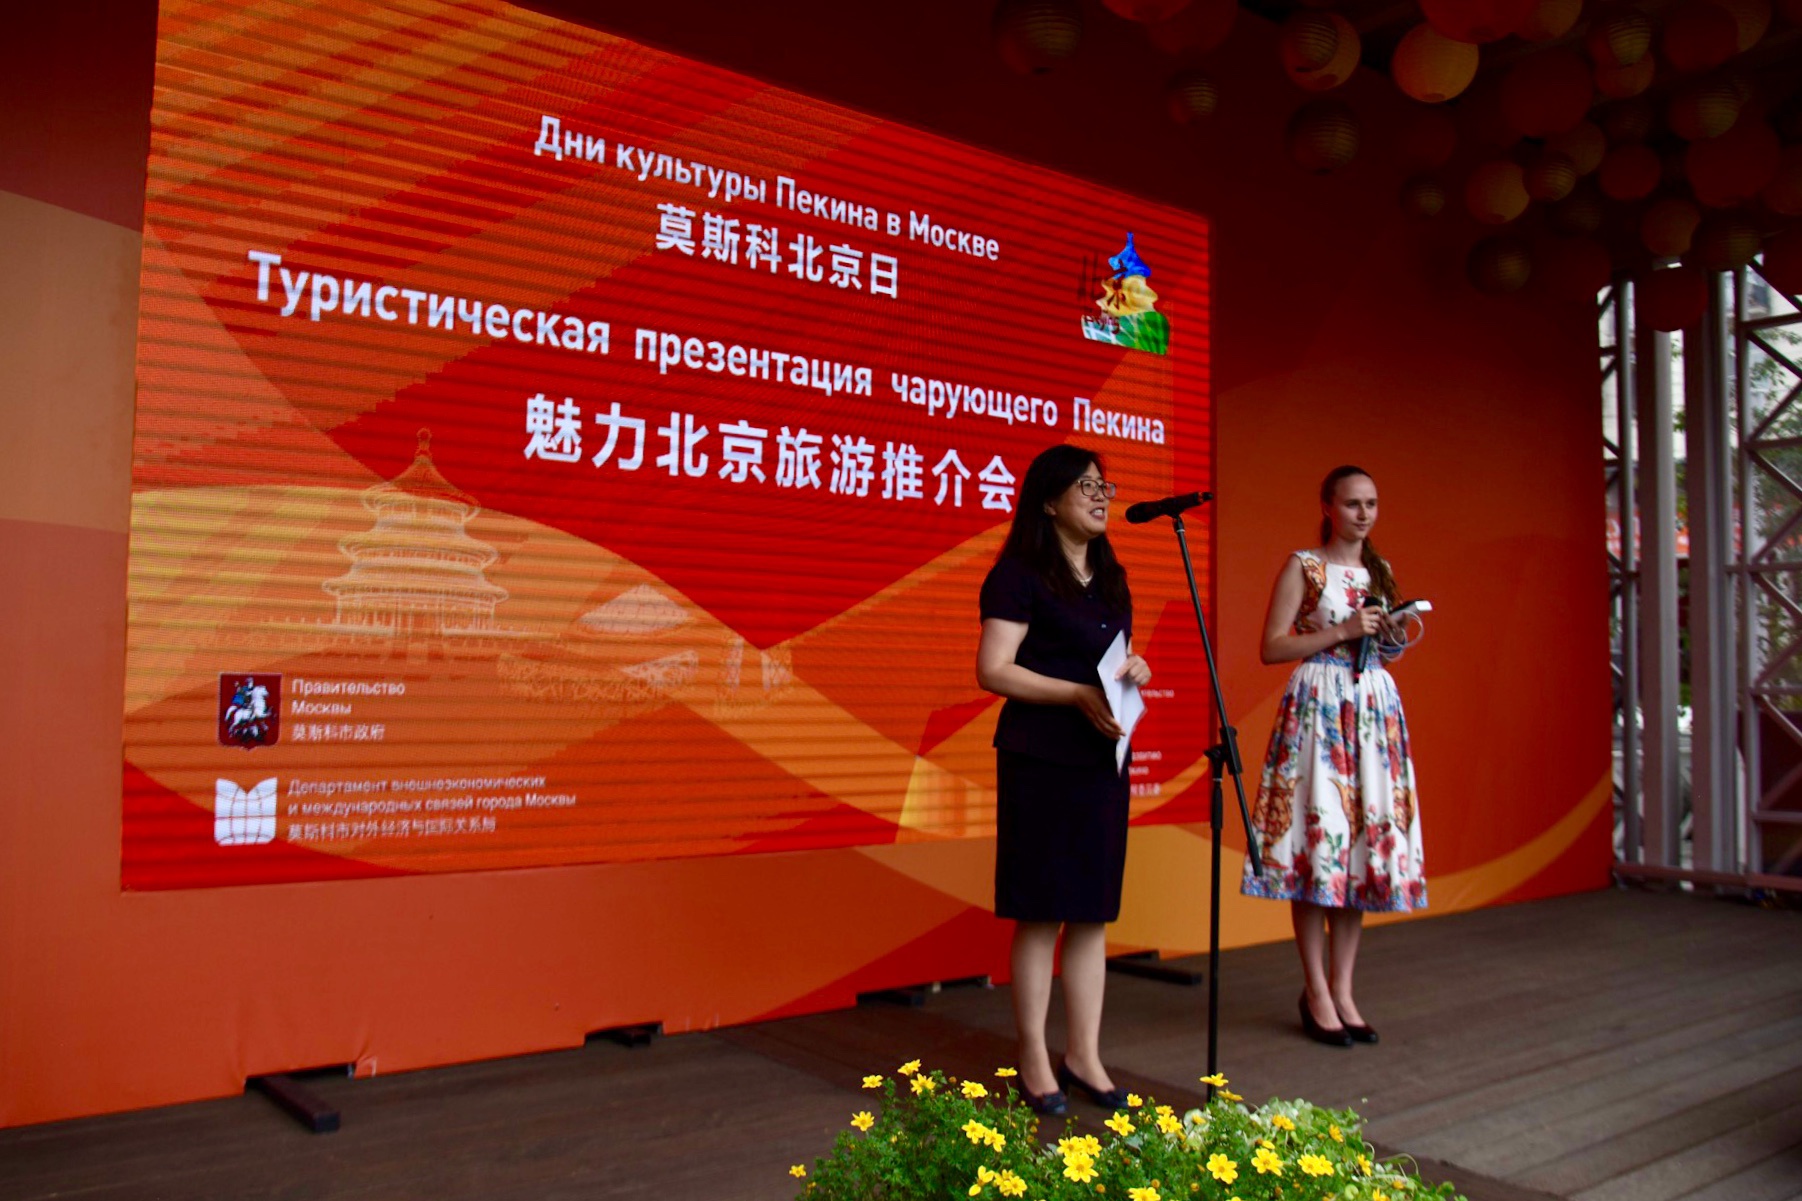 Beijing Tourism Promotion Activity Held in Moscow, Russia_03.jpg